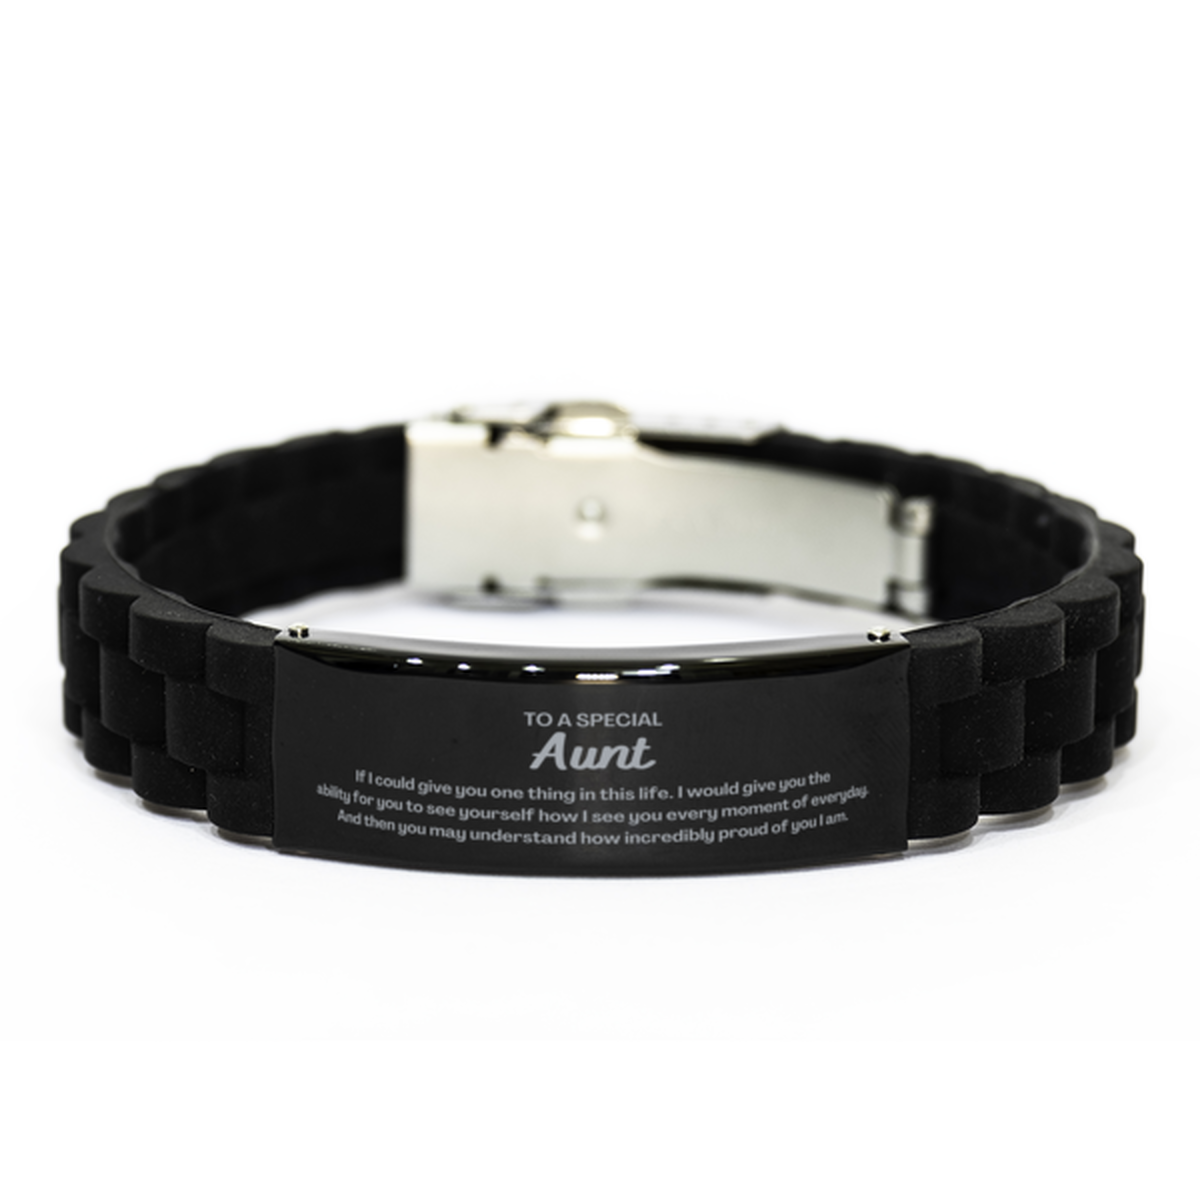 To My Aunt Black Glidelock Clasp Bracelet, Gifts For Aunt Engraved, Inspirational Gifts for Christmas Birthday, Epic Gifts for Aunt To A Special Aunt how incredibly proud of you I am